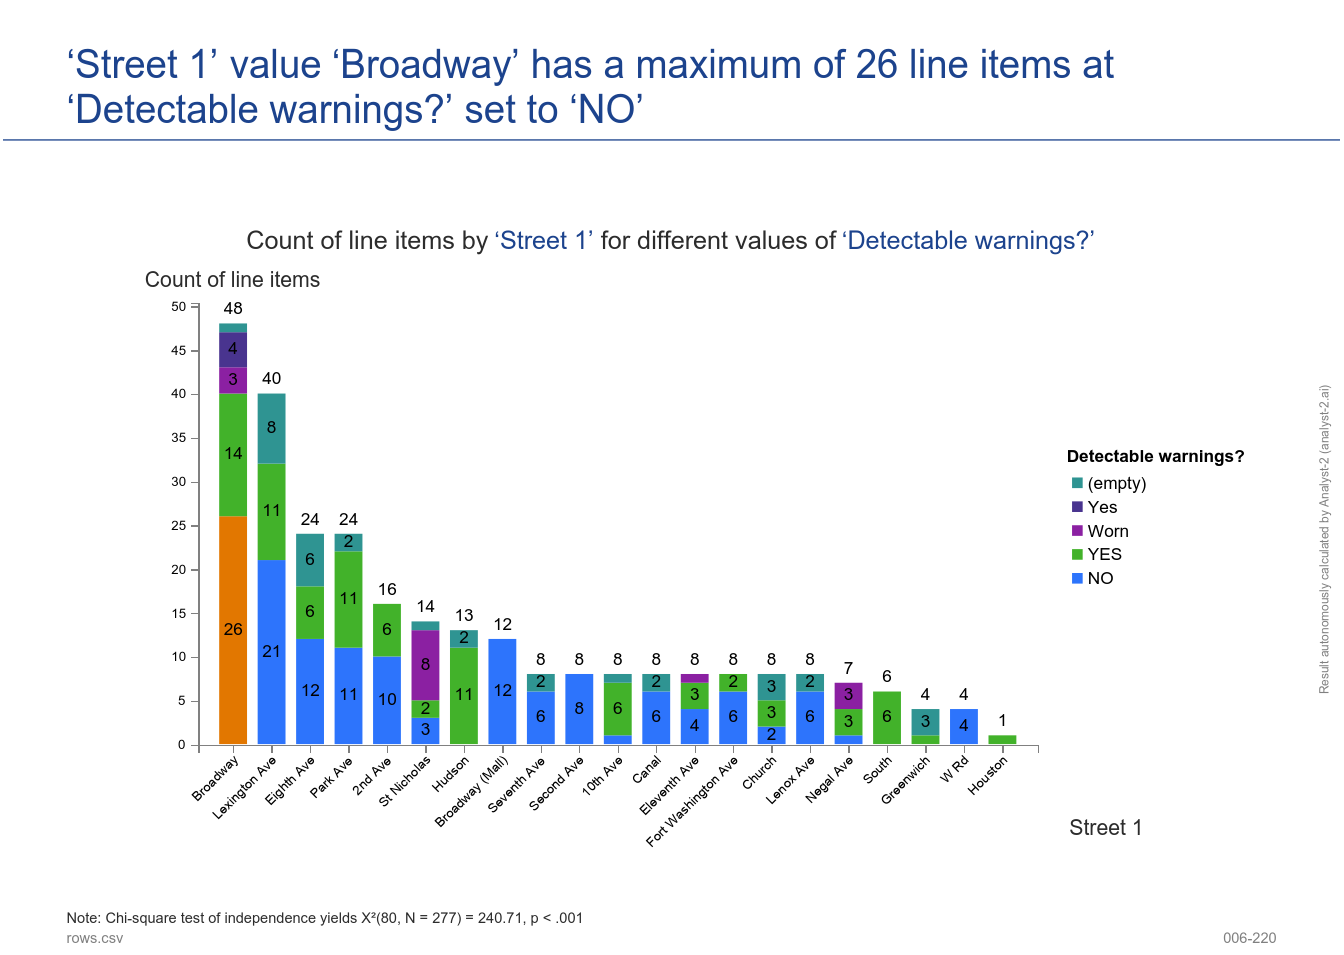 ‘Street 1’ value ‘Broadway’ has a maximum of 26 line items at ‘Detectable warnings?’ set to ‘NO’. (MBPO Pedestrian Ramp Report - 006-220)